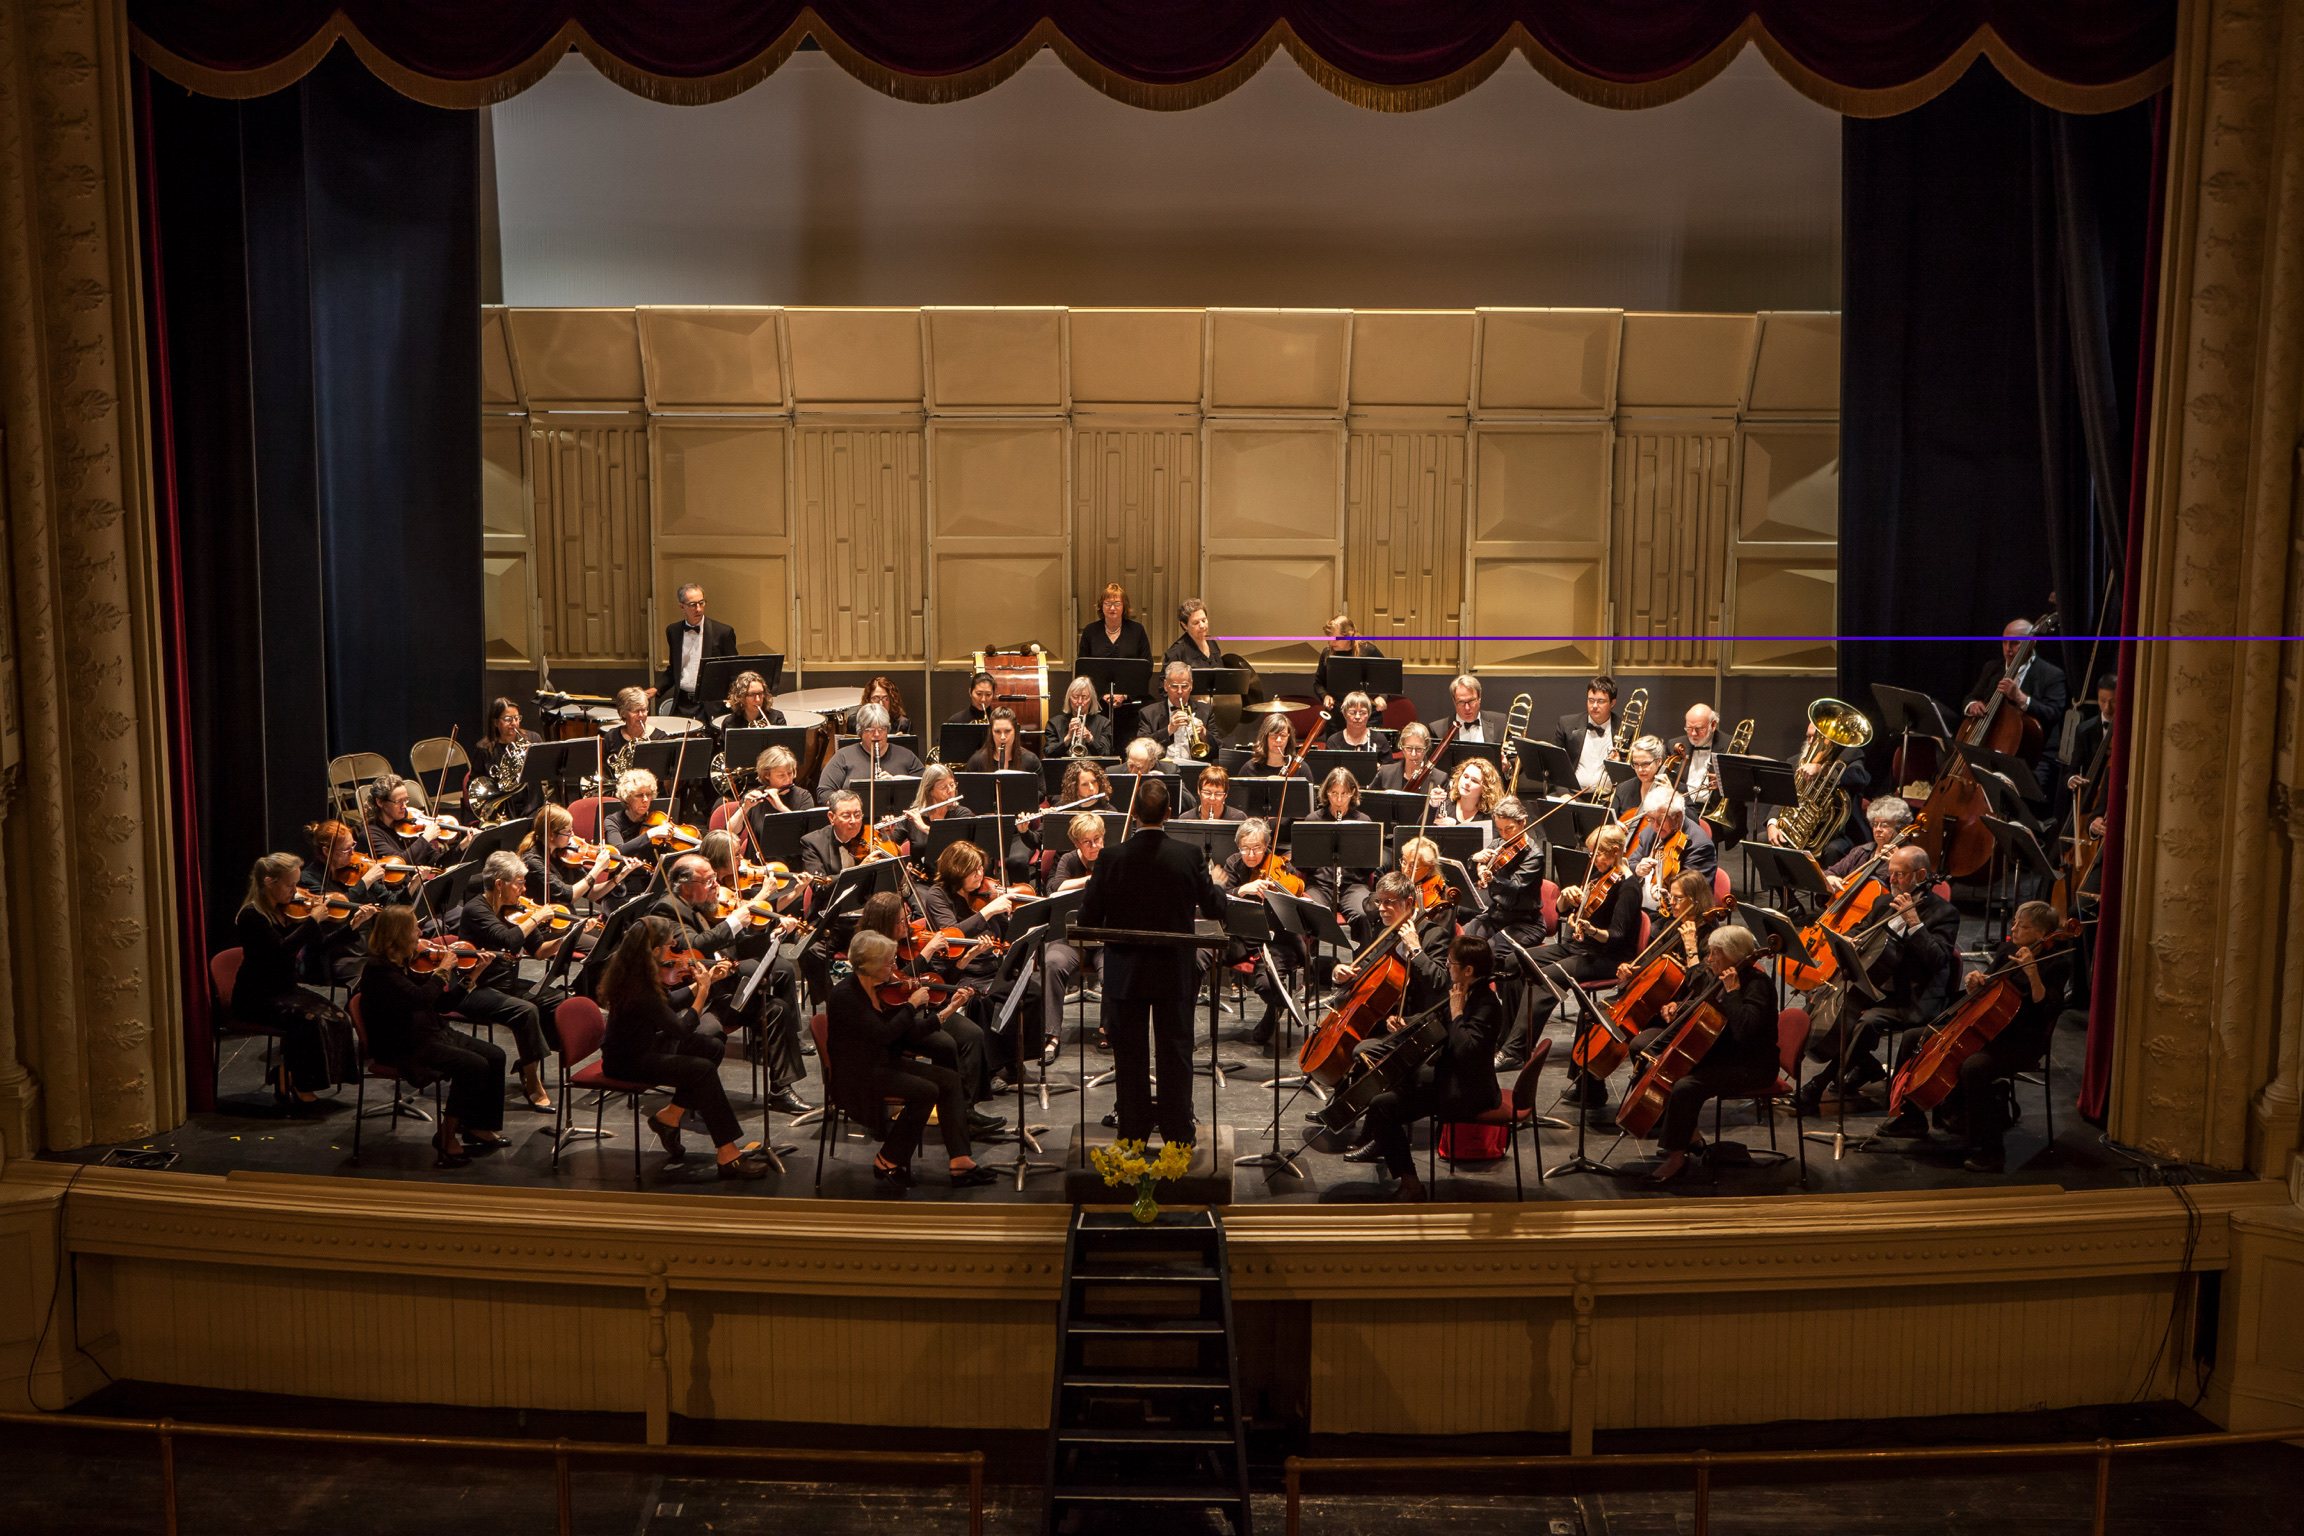 Vermont Philharmonic orchestra performing on stage at Barre Opera House